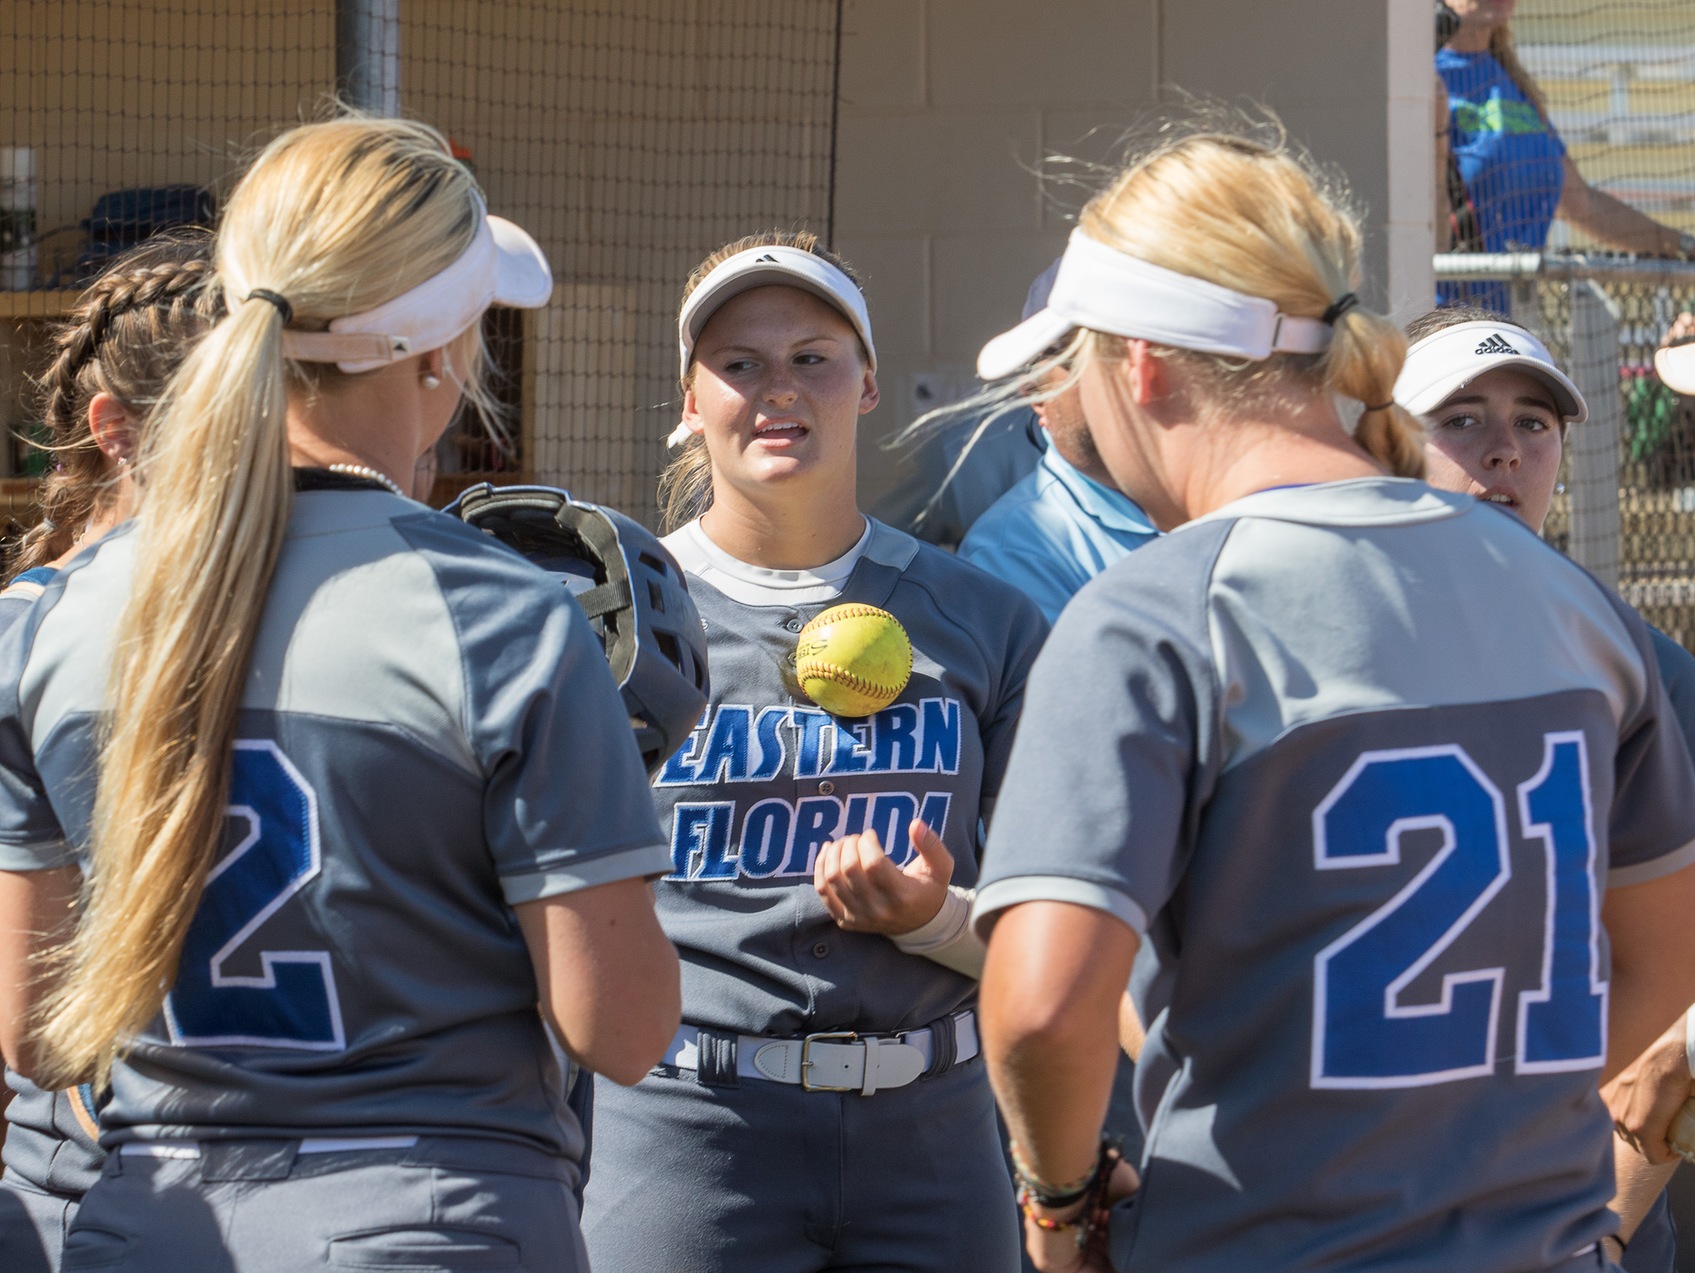 Softball team can clinch spot in tourney with wins on Saturday